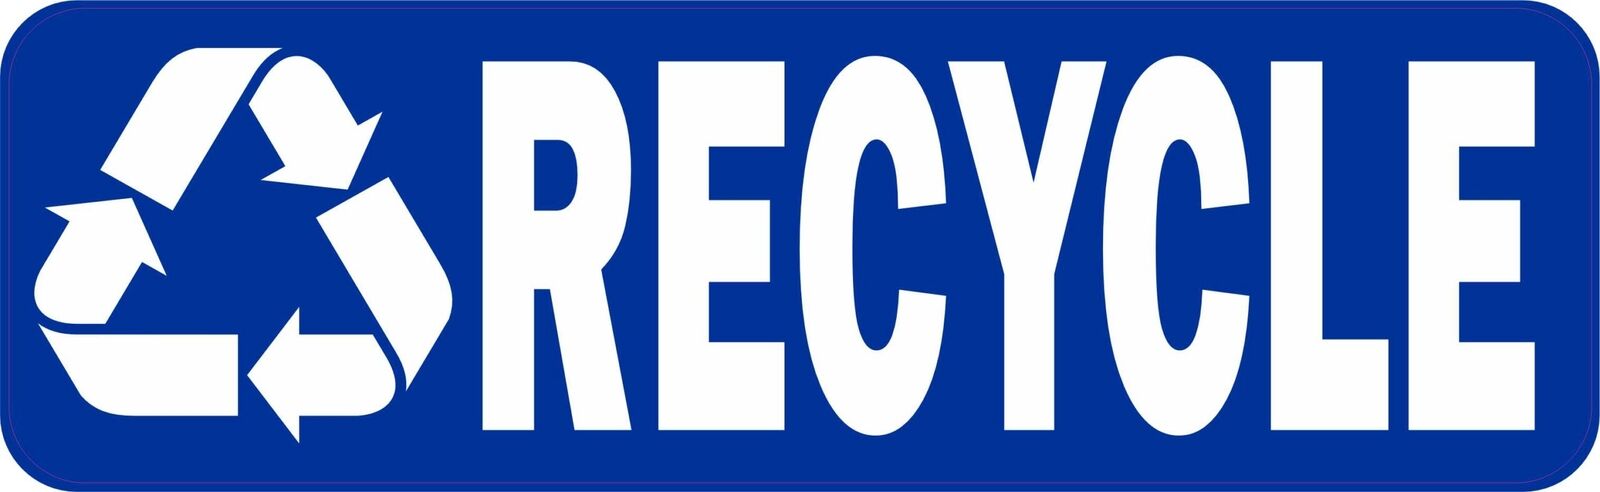 10in x 3in Blue Recycle Vinyl Sticker Car Truck Vehicle Bumper Decal